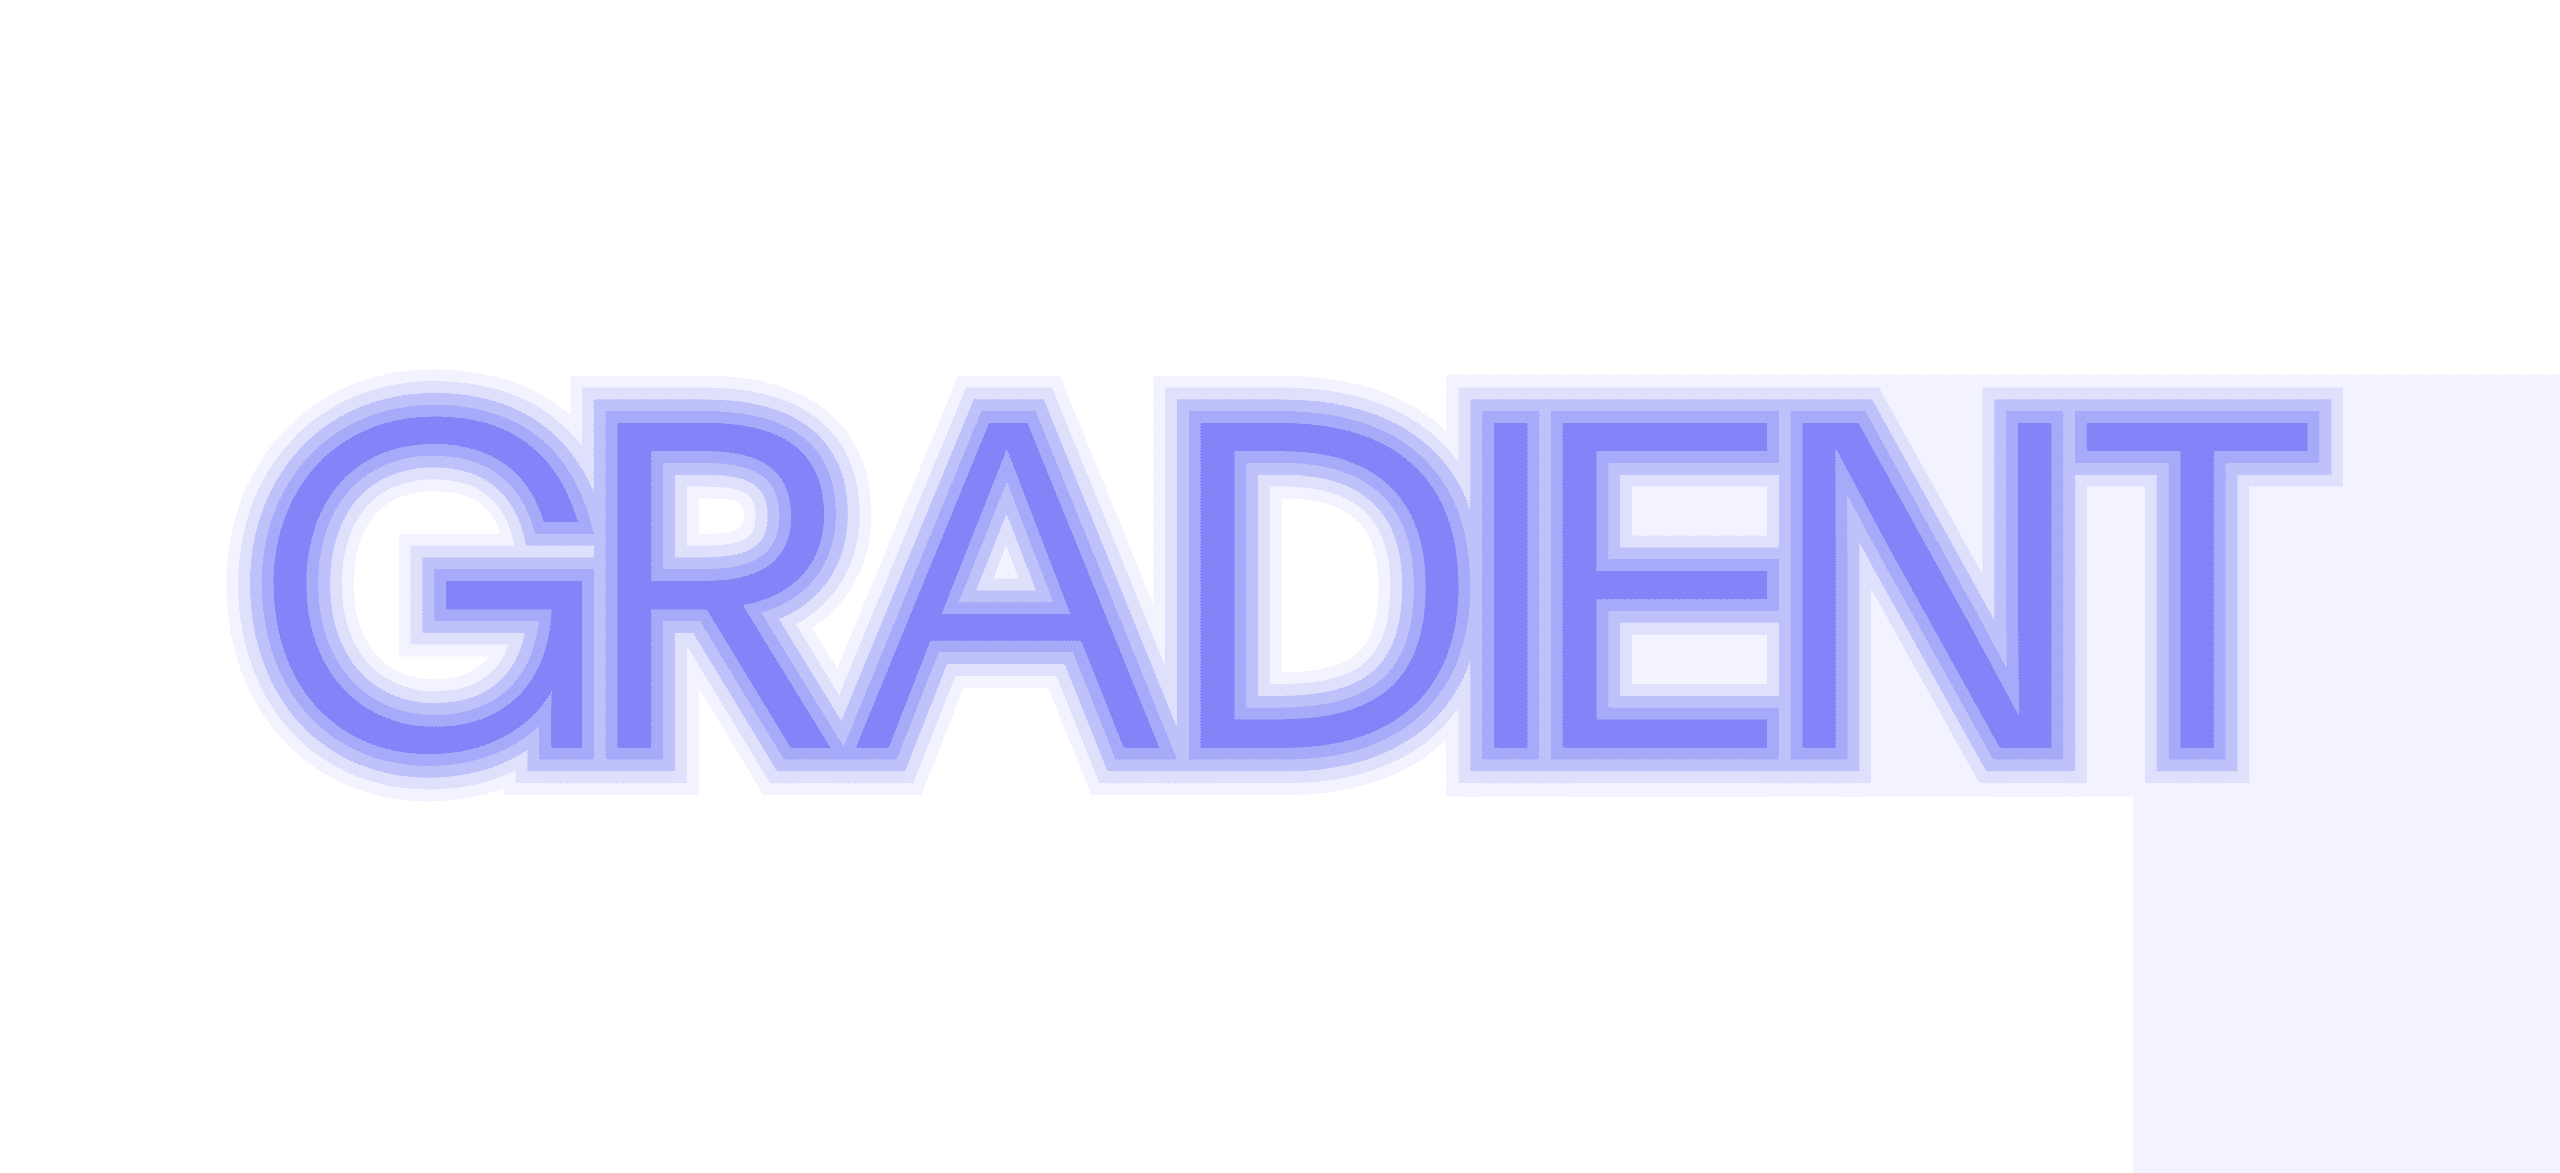 The word Gradient in purple color